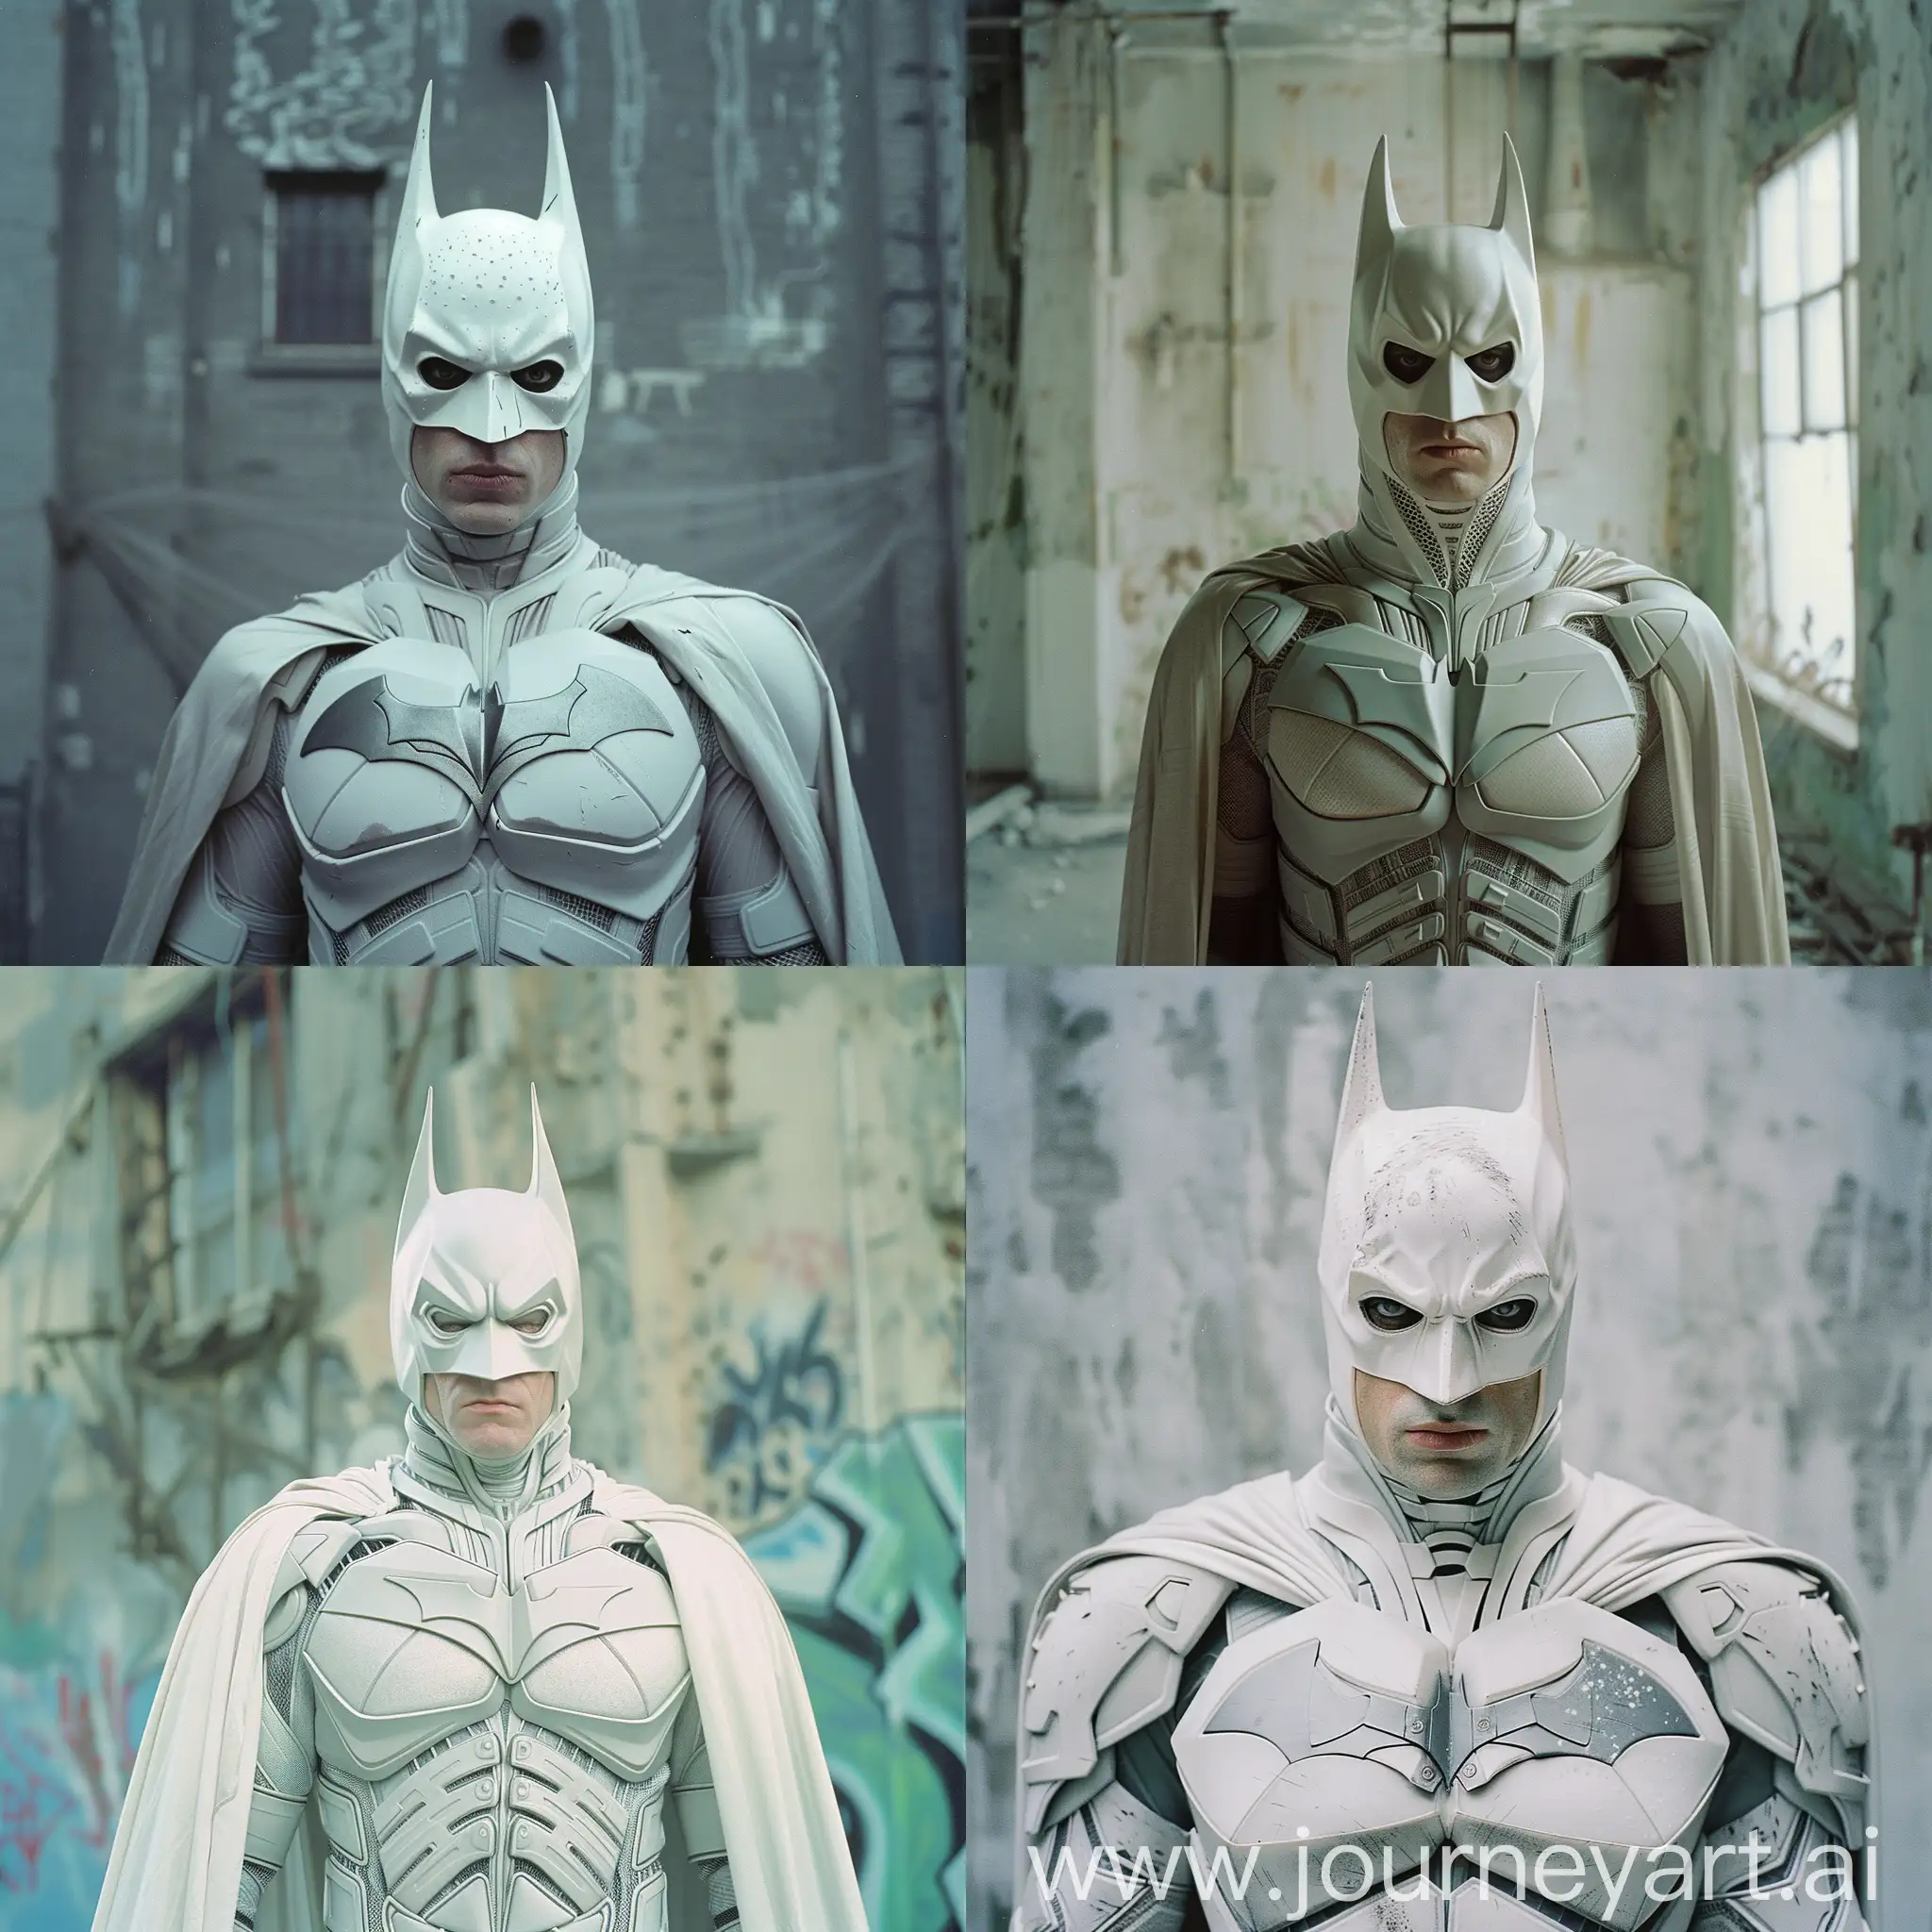 Shot on expired film. dvd screengrab from film. A photo of a batman in unique White costume --v 6.0
